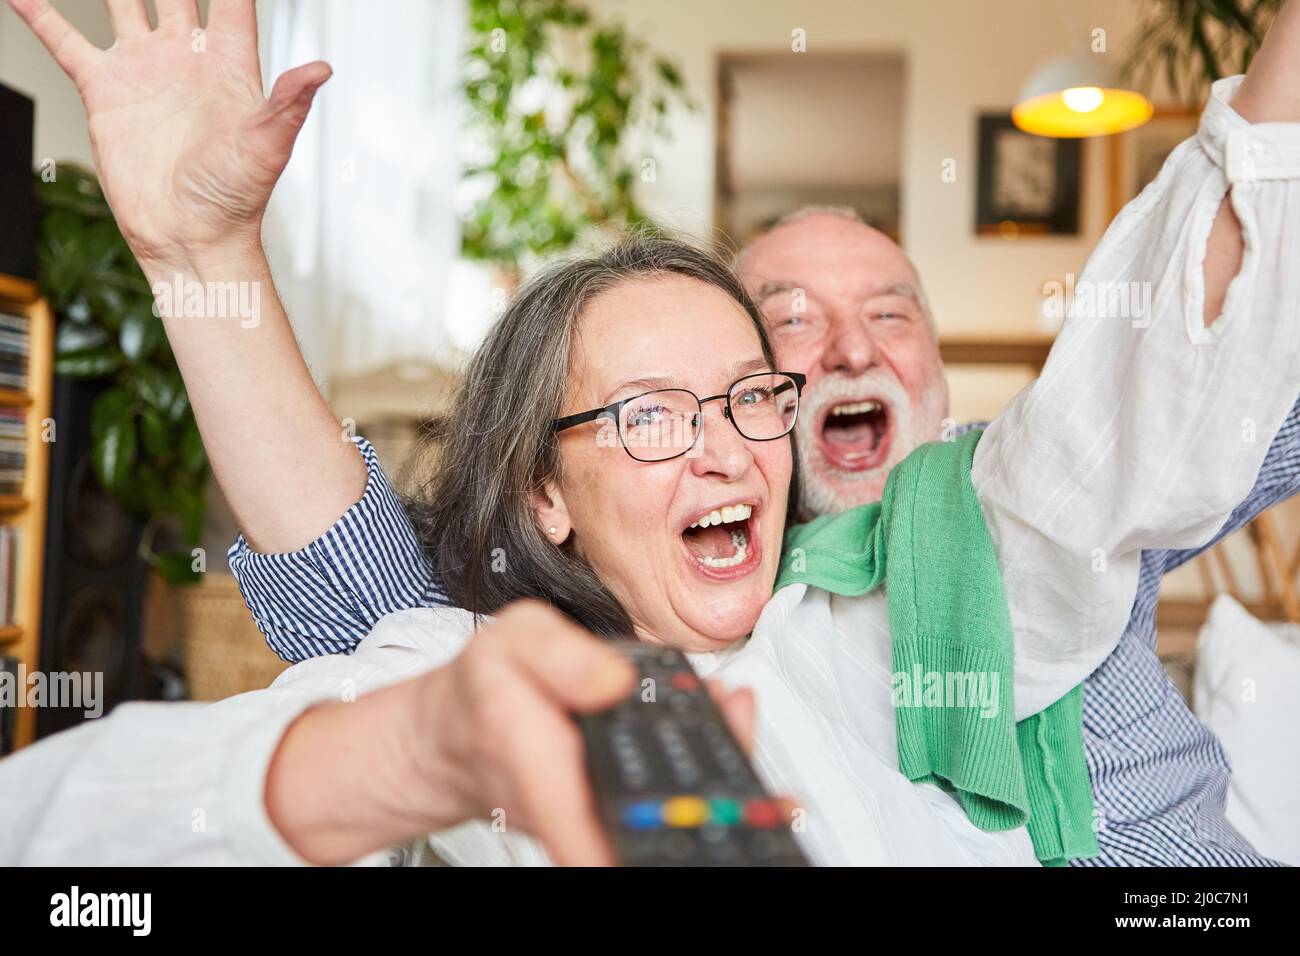 Couple of seniors with tv remote control cheering happily symbolizing lottery win or good luck Stock Photo